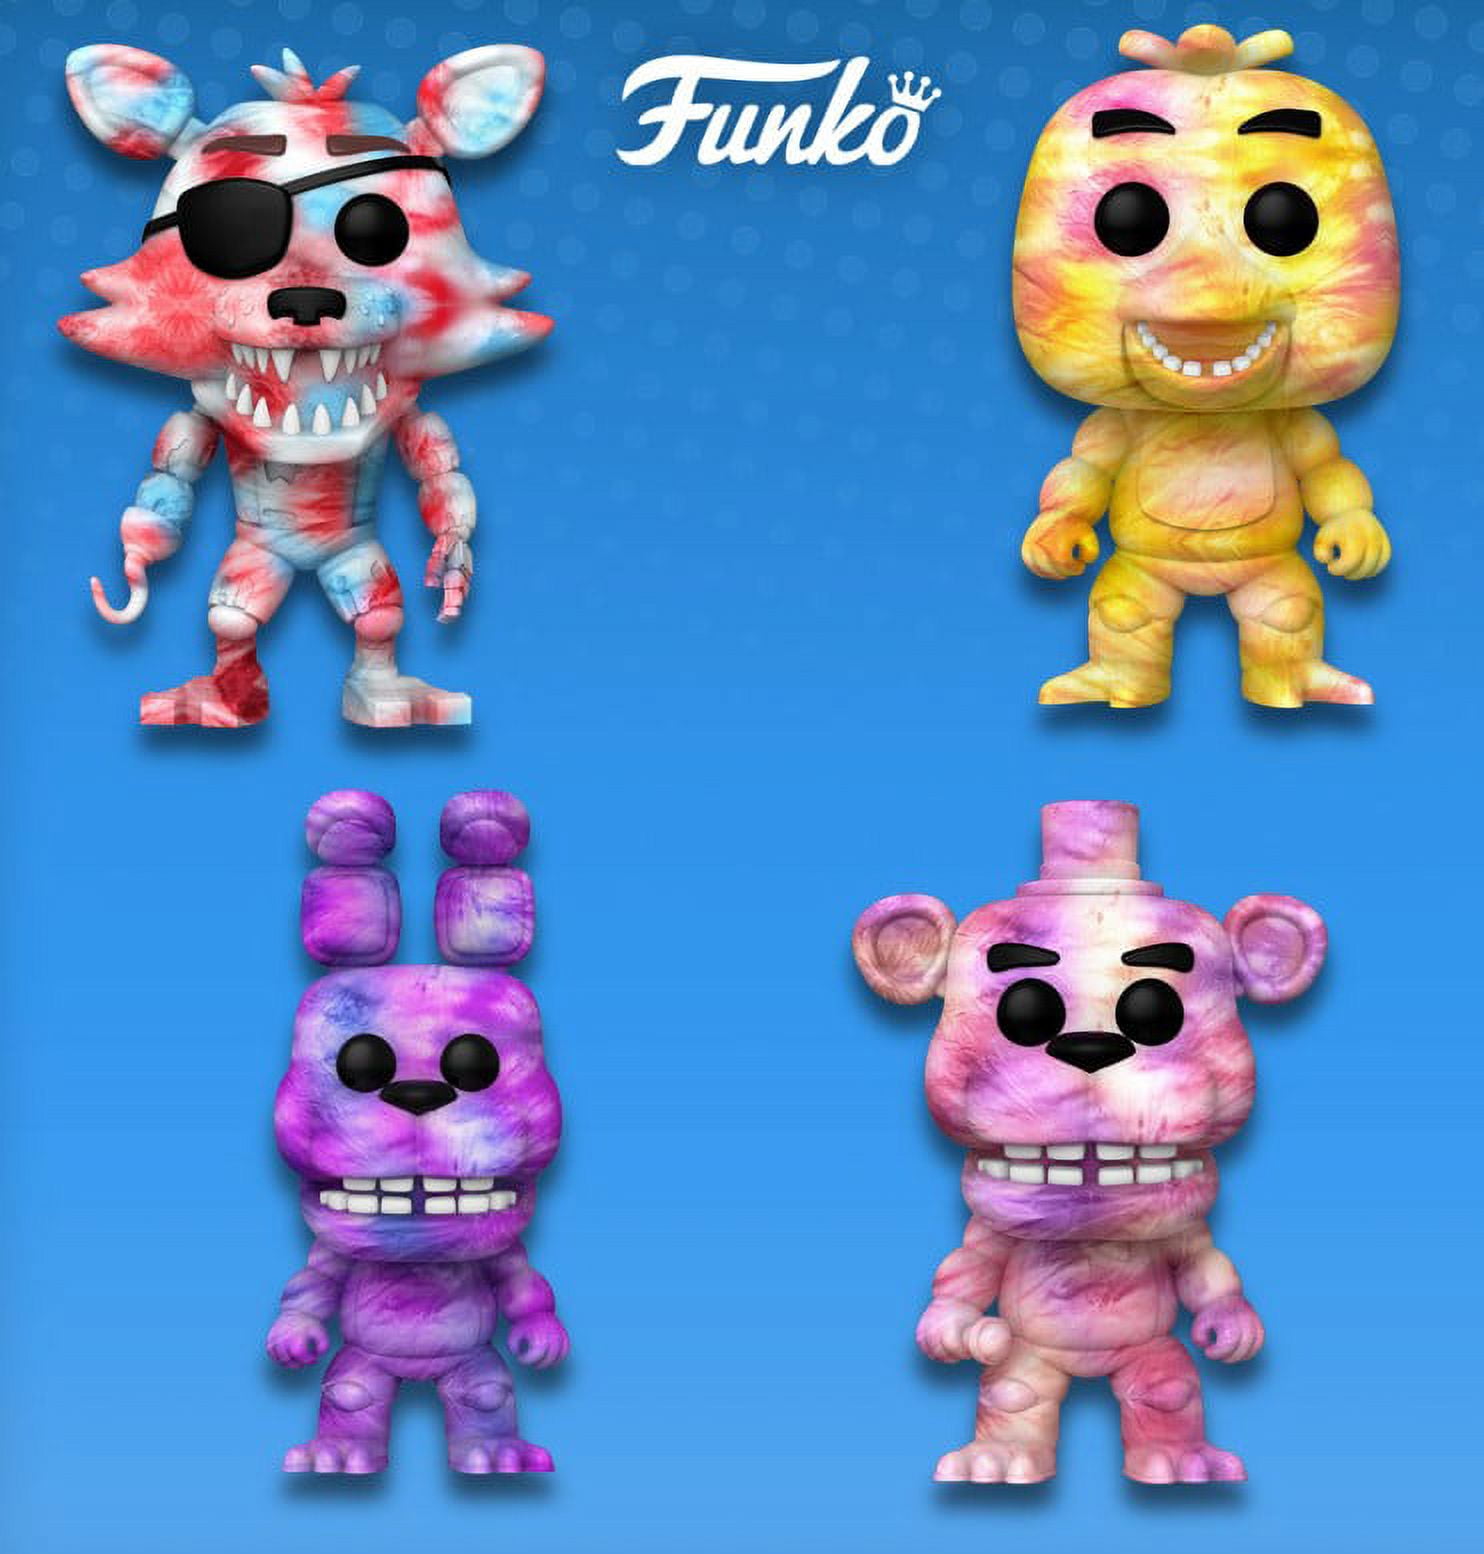 Funko Pop! Games: Five Nights at Freddy's Tie Dye Collectors Set- Bonnie,  Chica, Foxy, and Freddy